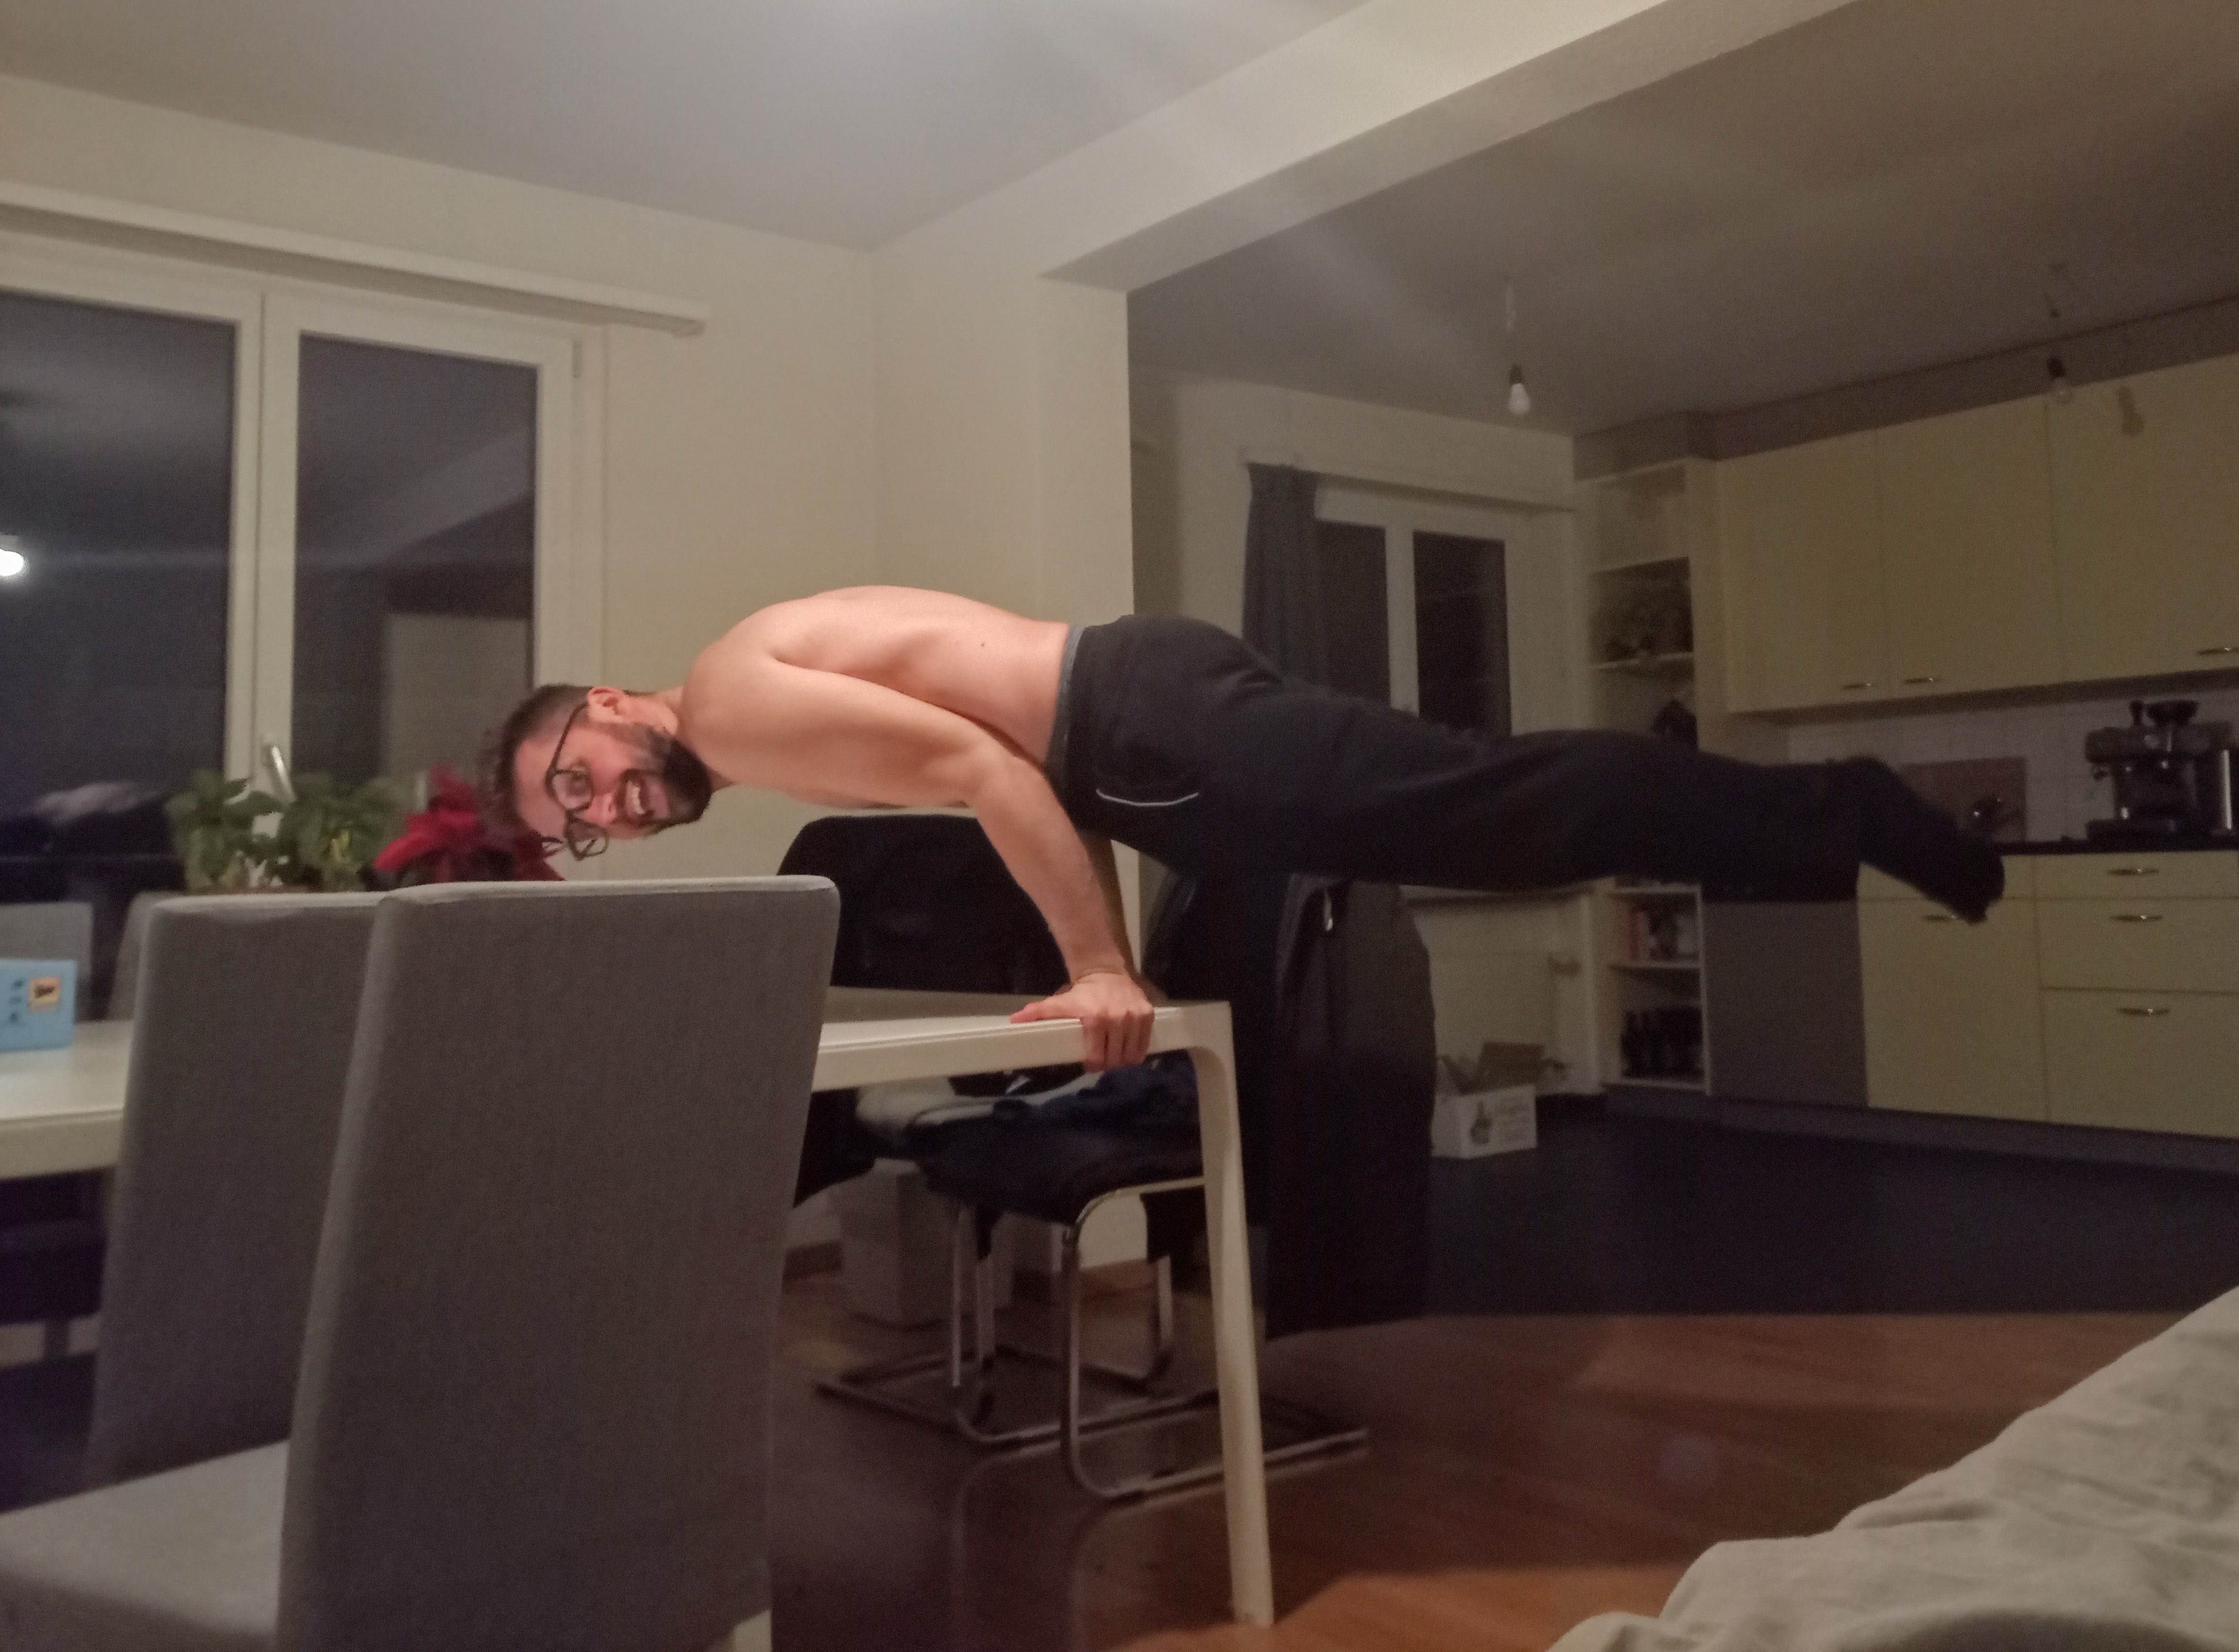 A plank hold on the table